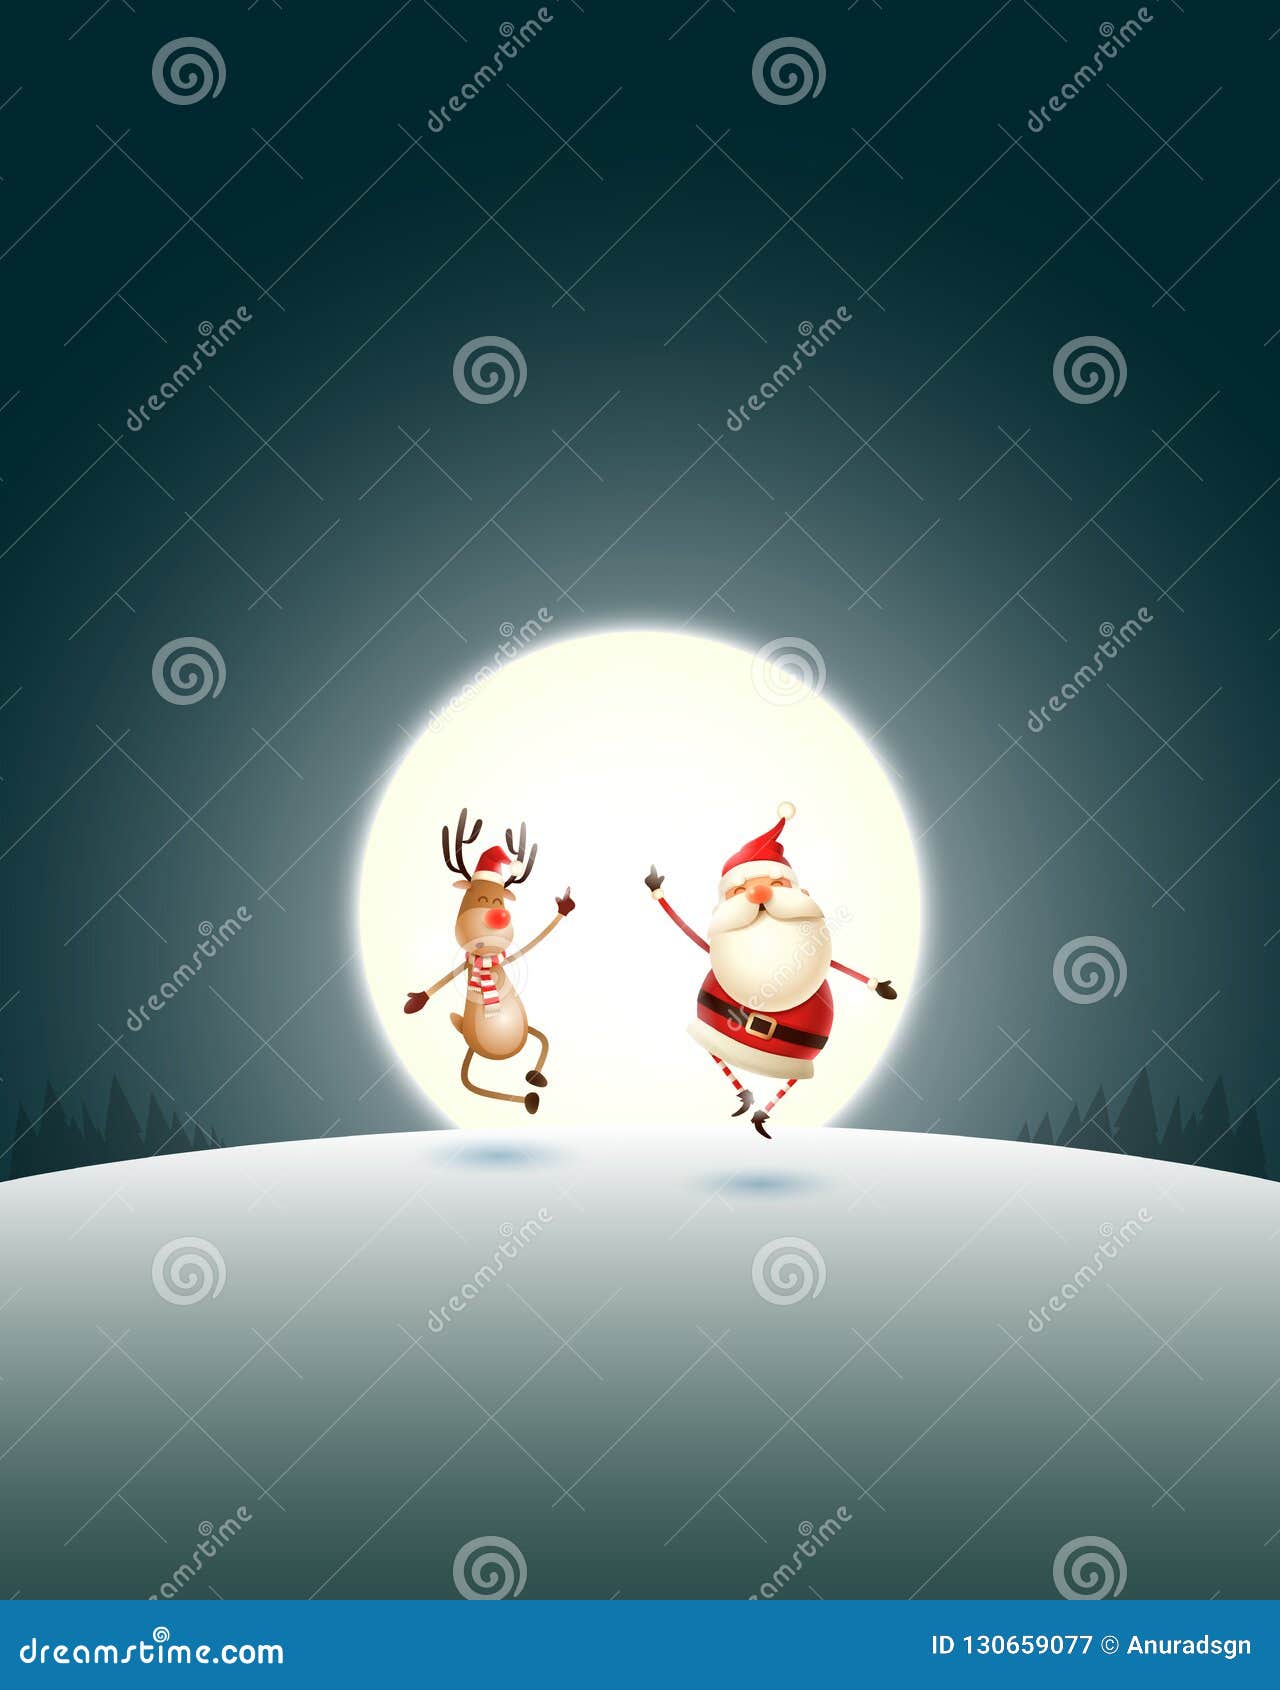 happy expresion of santa claus and reindeer on winter landscape with moonlight - christmas poster